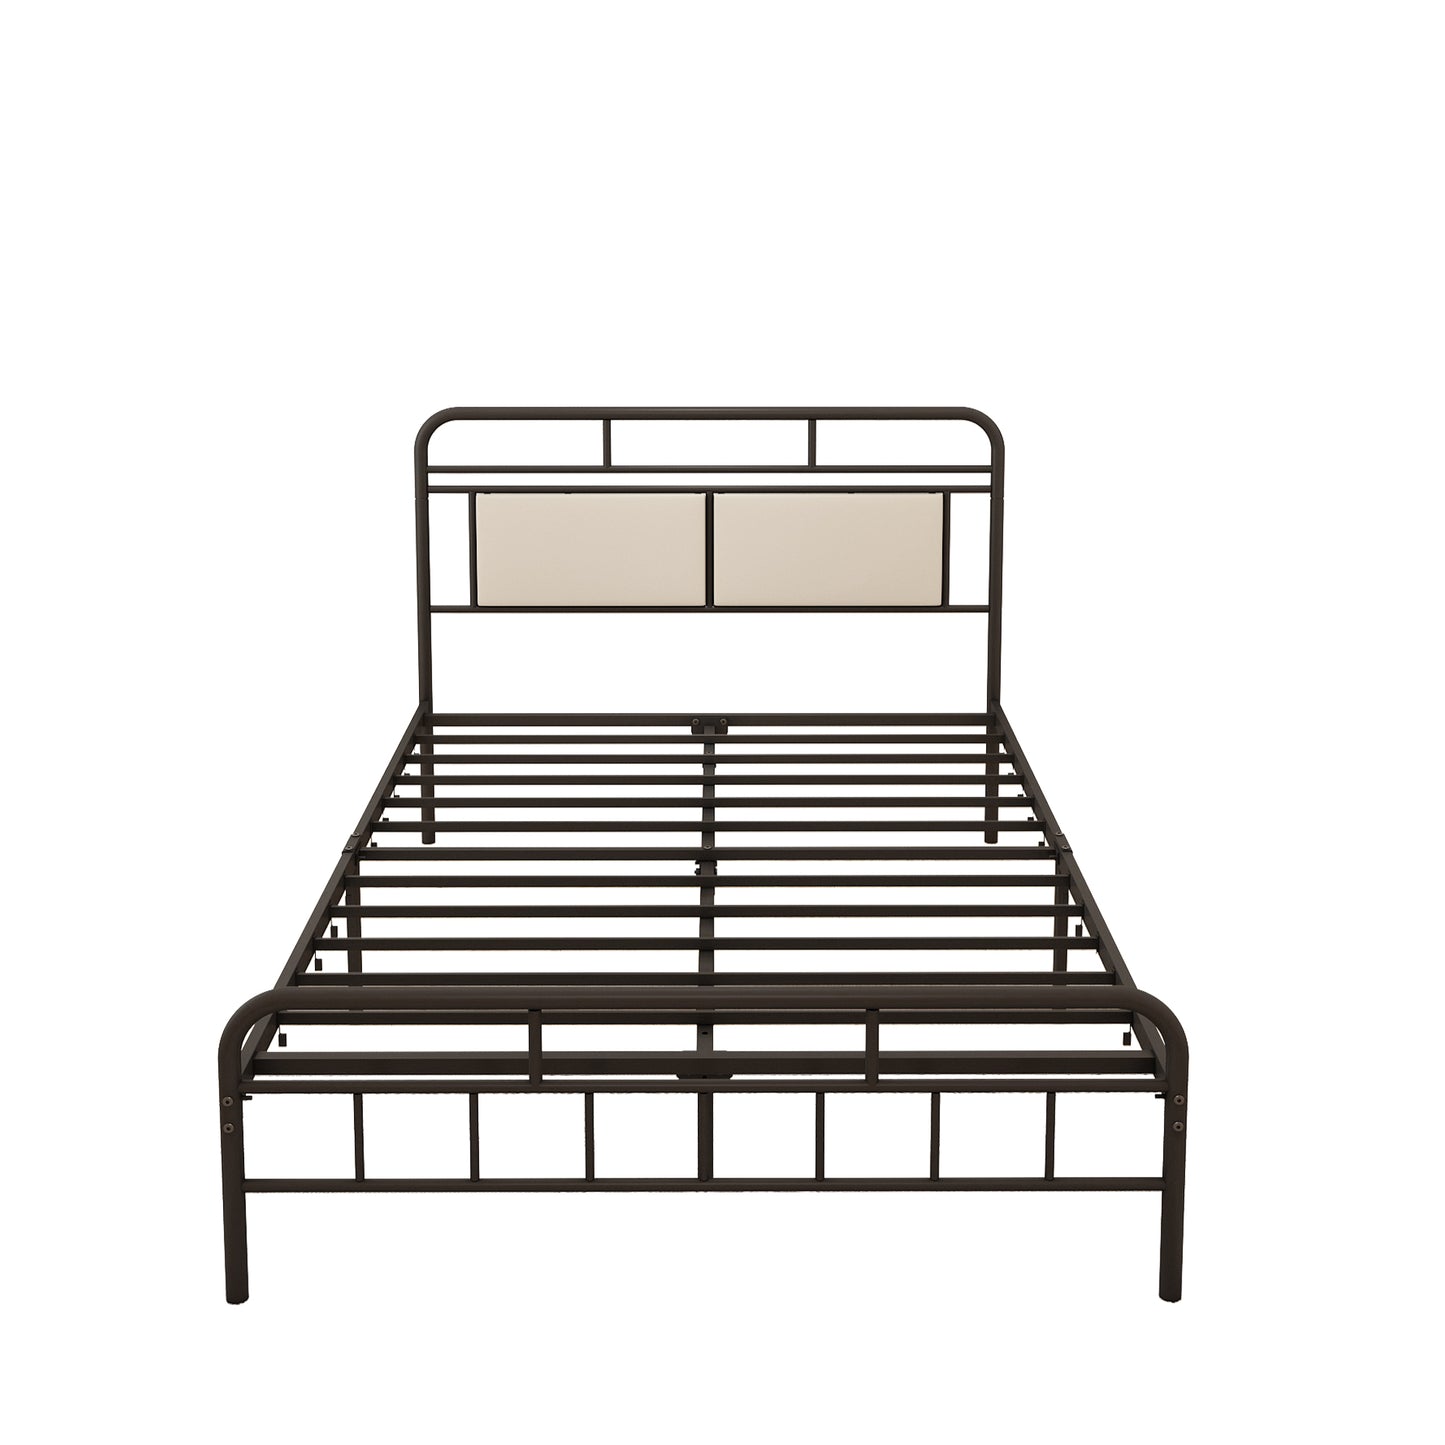 paproos Full Bed Frame, Metal Platform Bed Frame with 12-Inch Storage Space, Bed for Kids Girls Boys Adults, No Box Spring Needed, Black and Beige